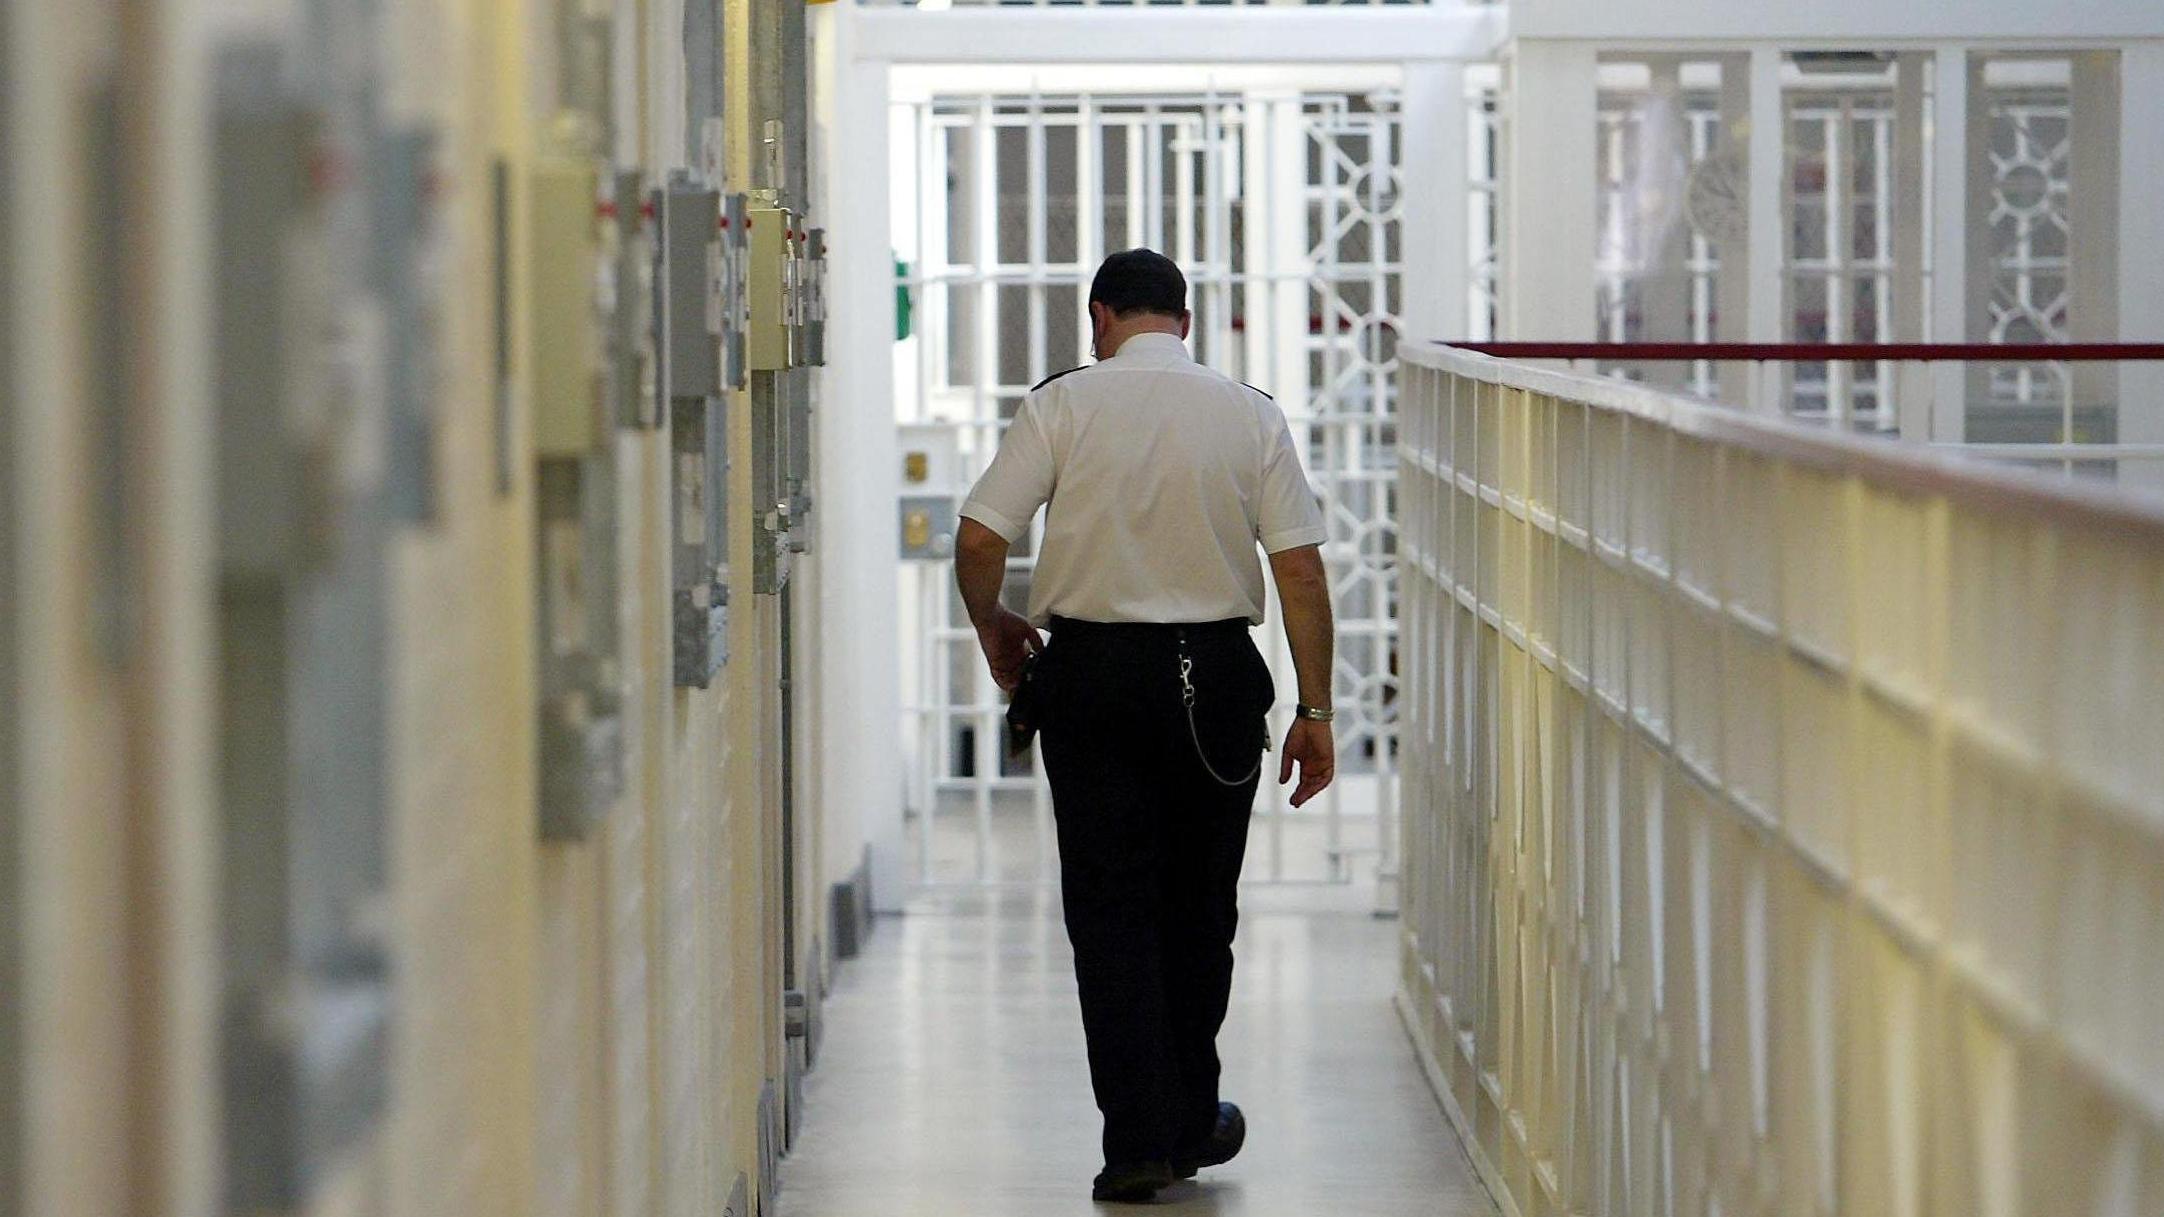 Emergency plea to use police cells as prisons run out of space